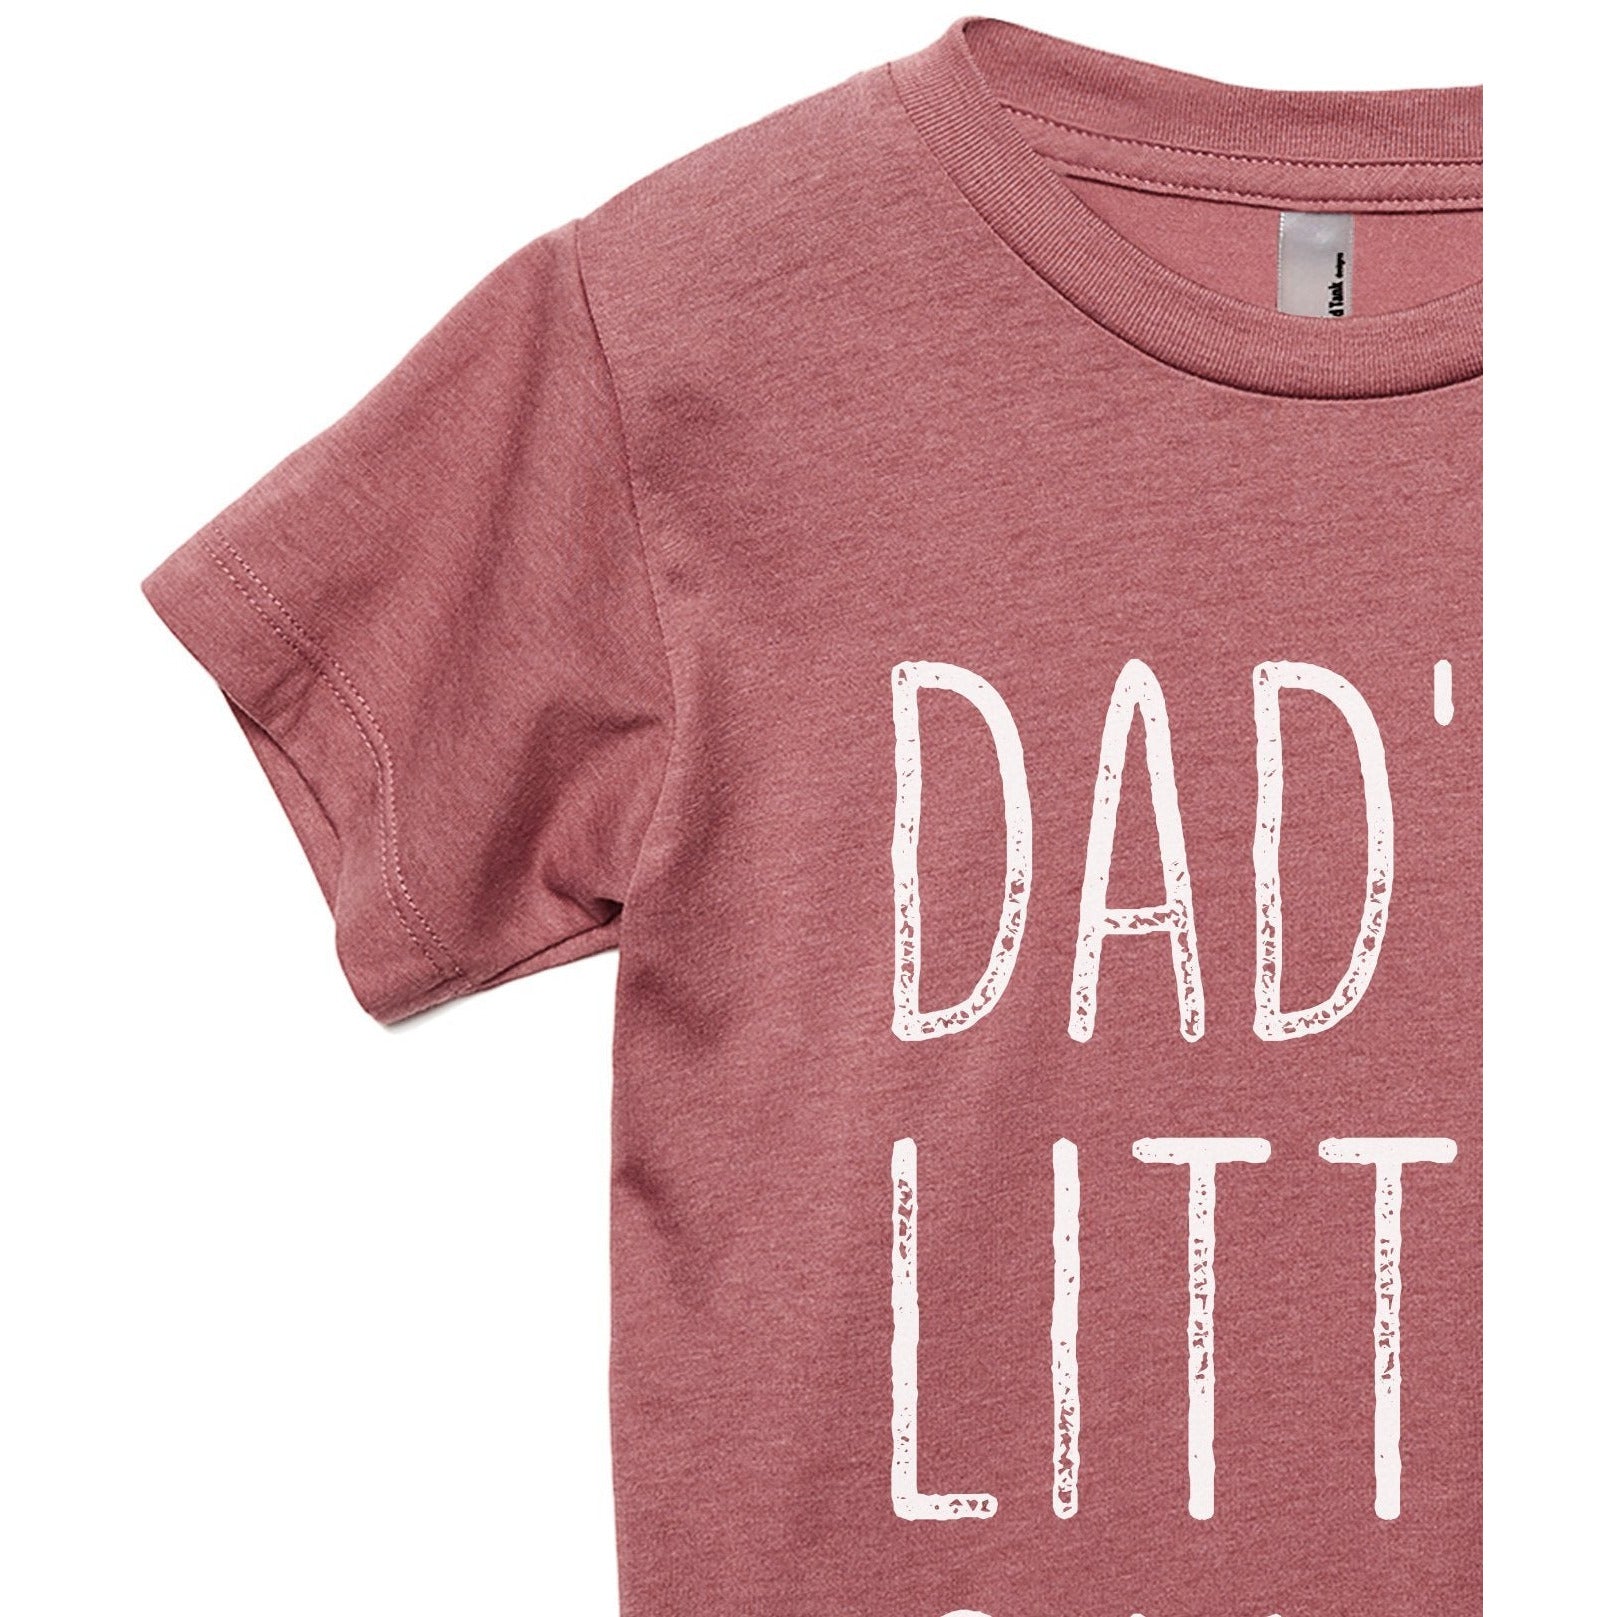 Dad's Little Gal Toddler's Go-To Crewneck Tee Heather Grey Close Up Sleeves Collar Details
